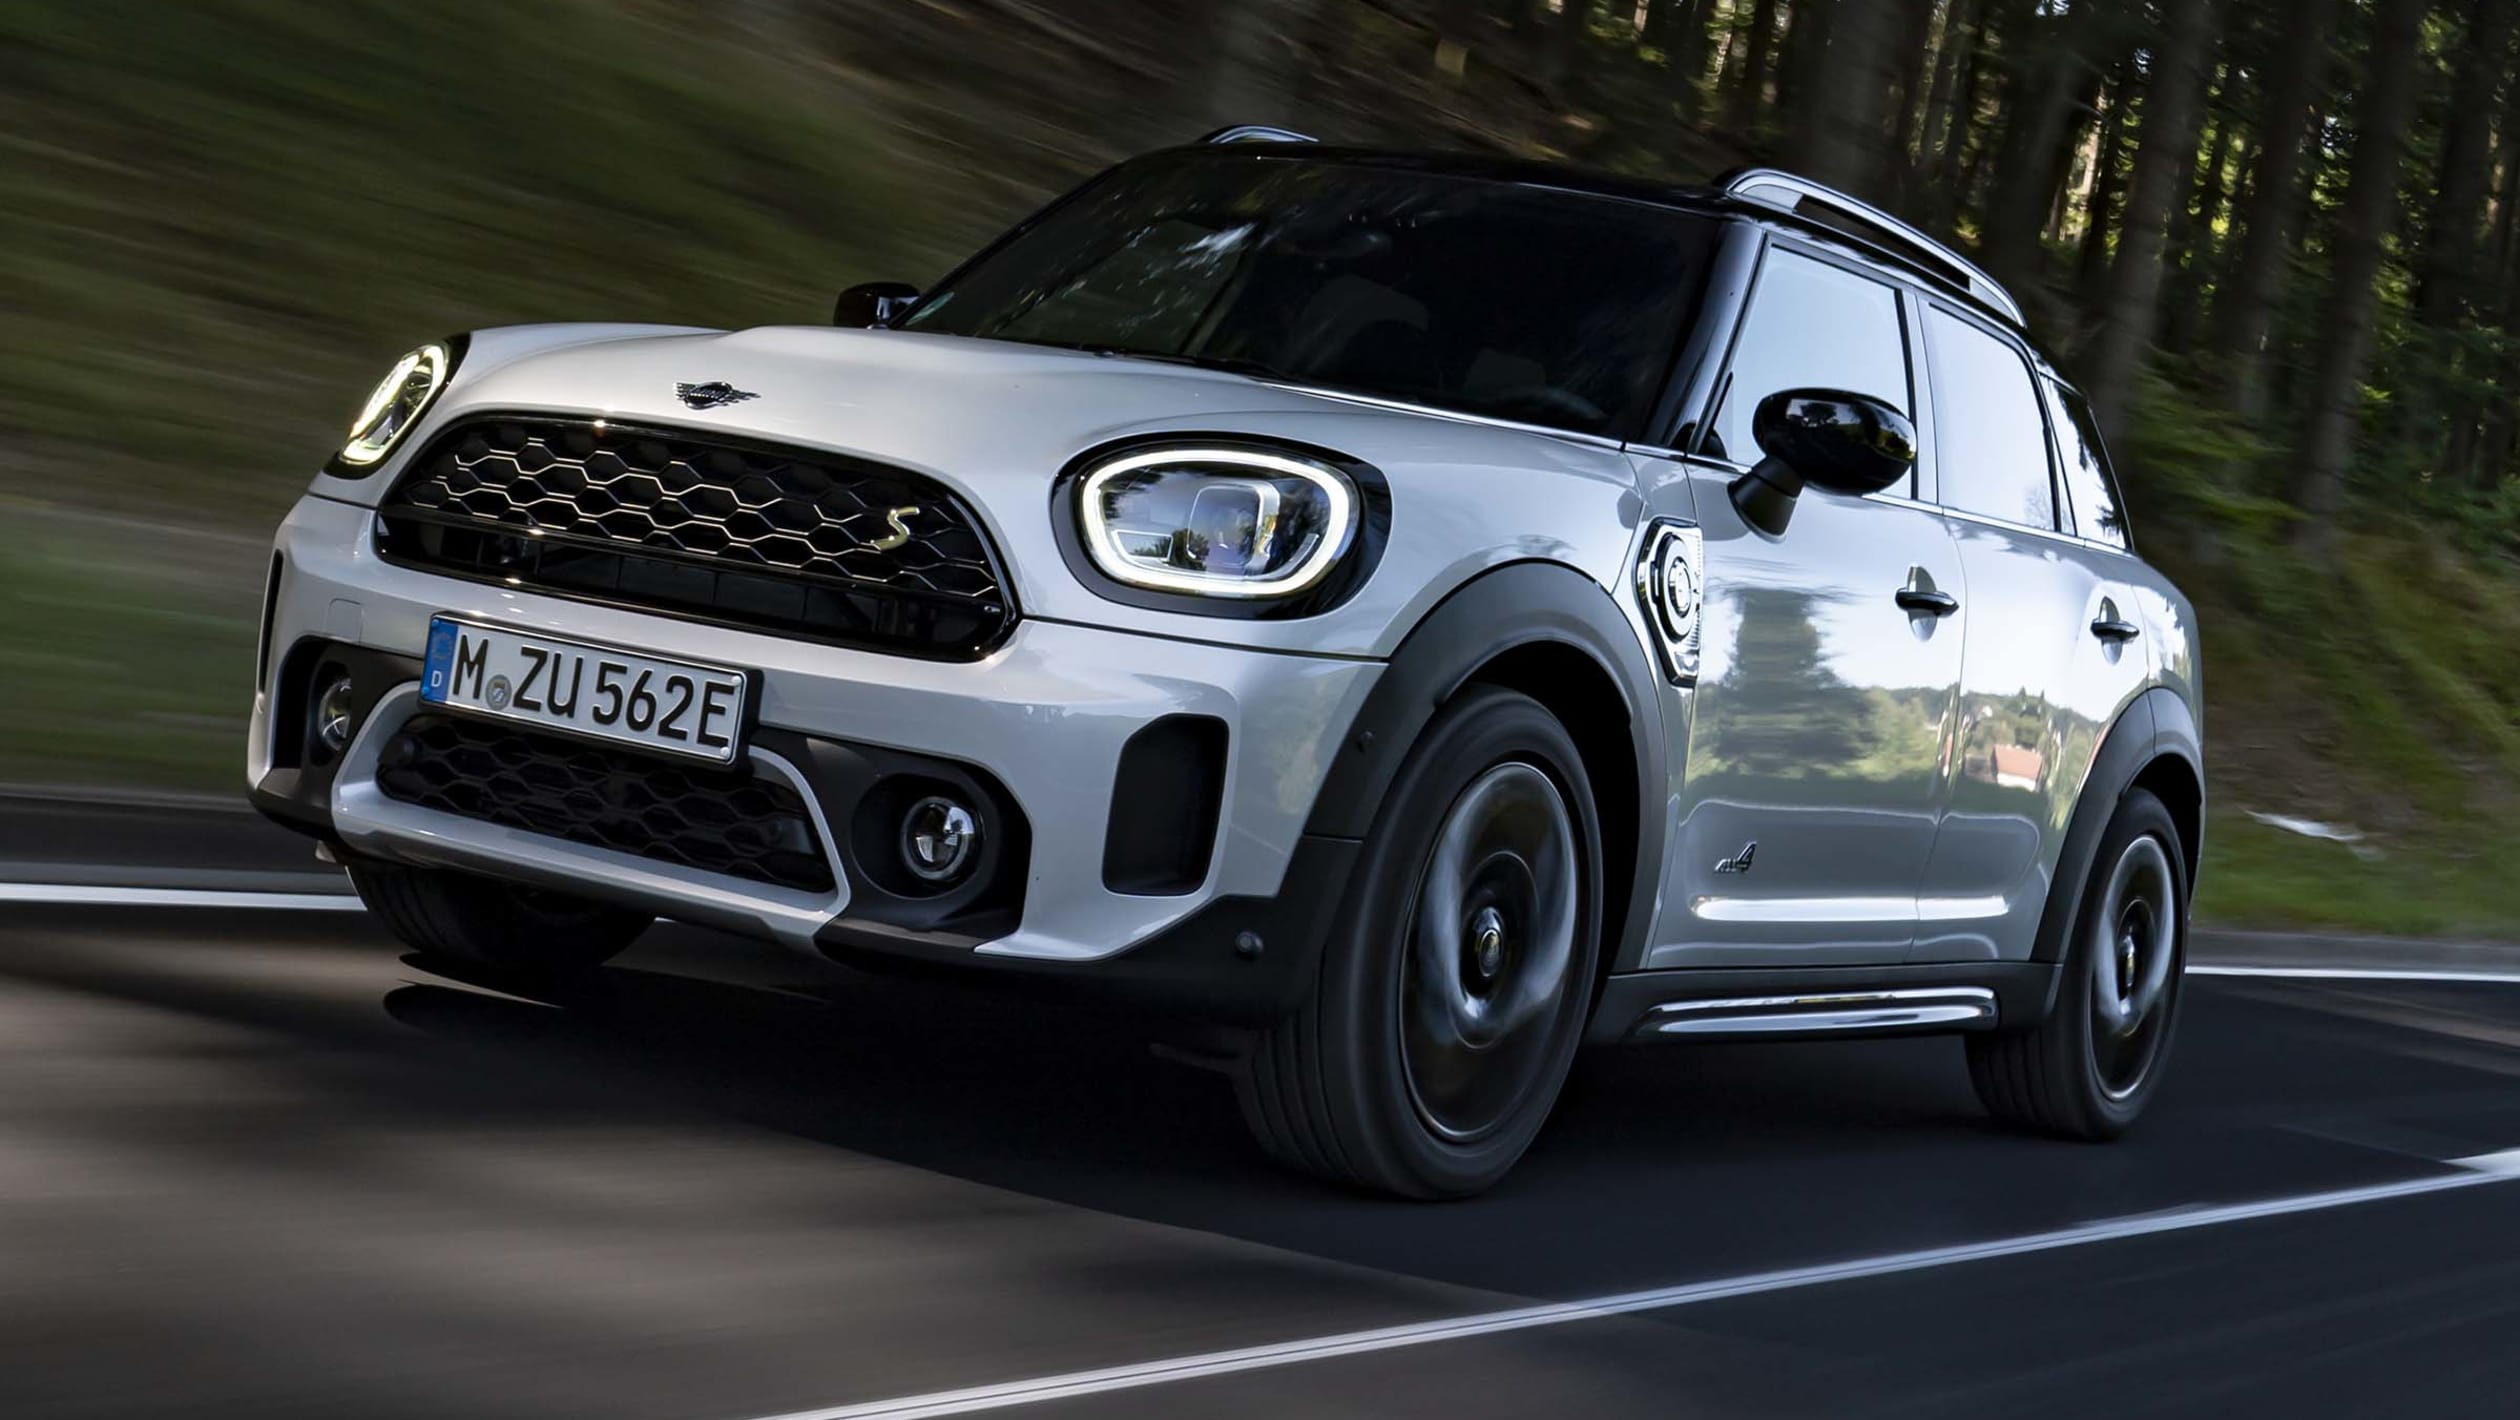 MINI Countryman hybrid review pictures | DrivingElectric